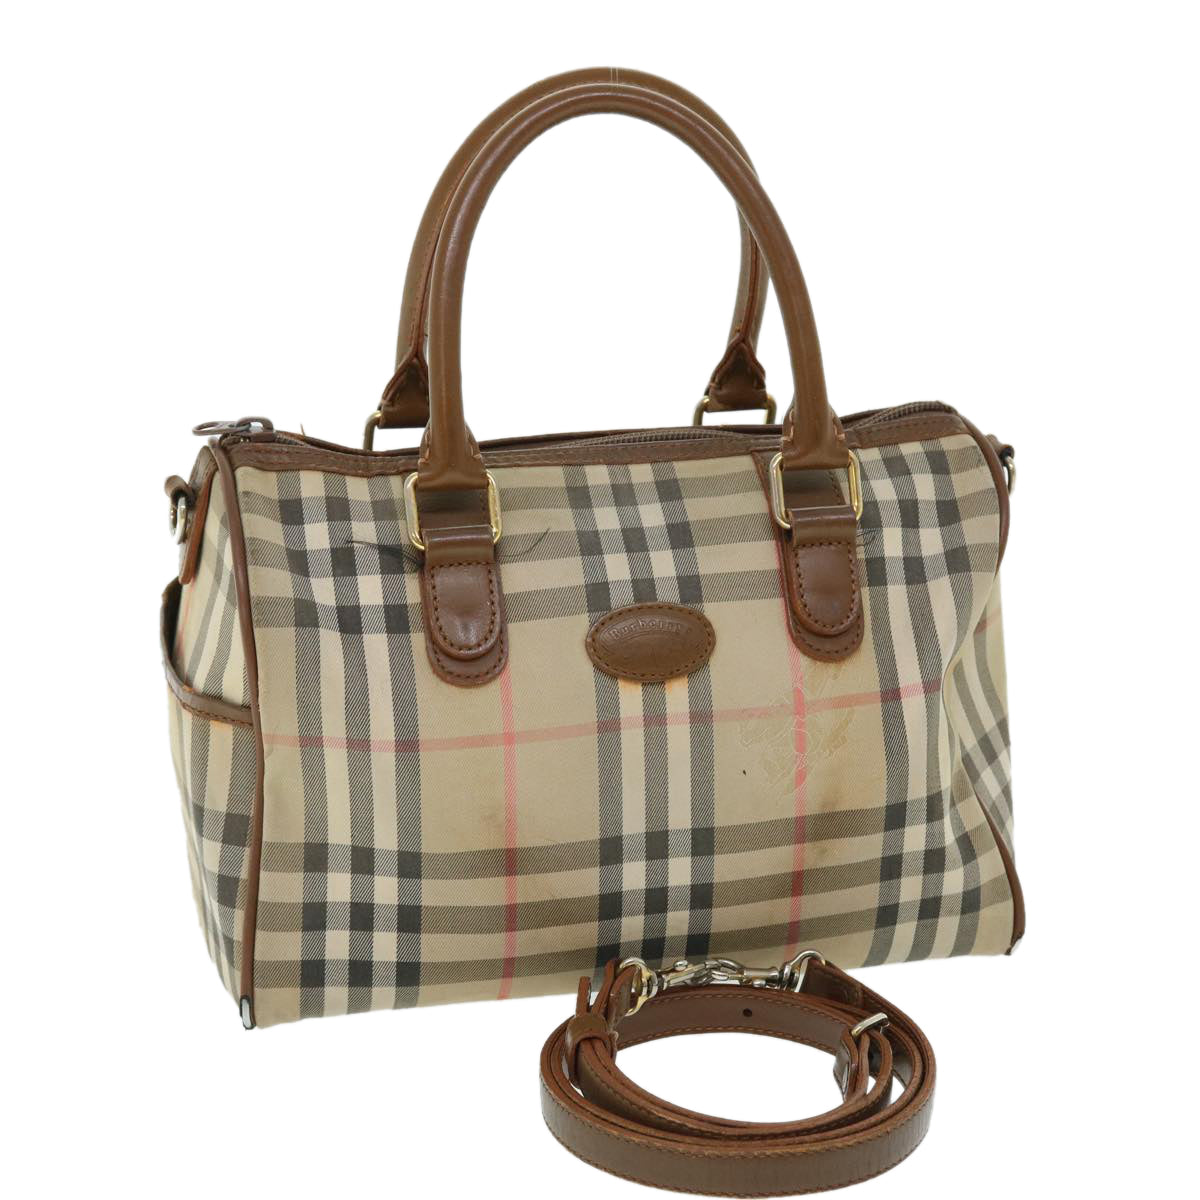 Burberrys Nova Check Hand Bag Canvas Leather 2way Beige Brown Auth 51861